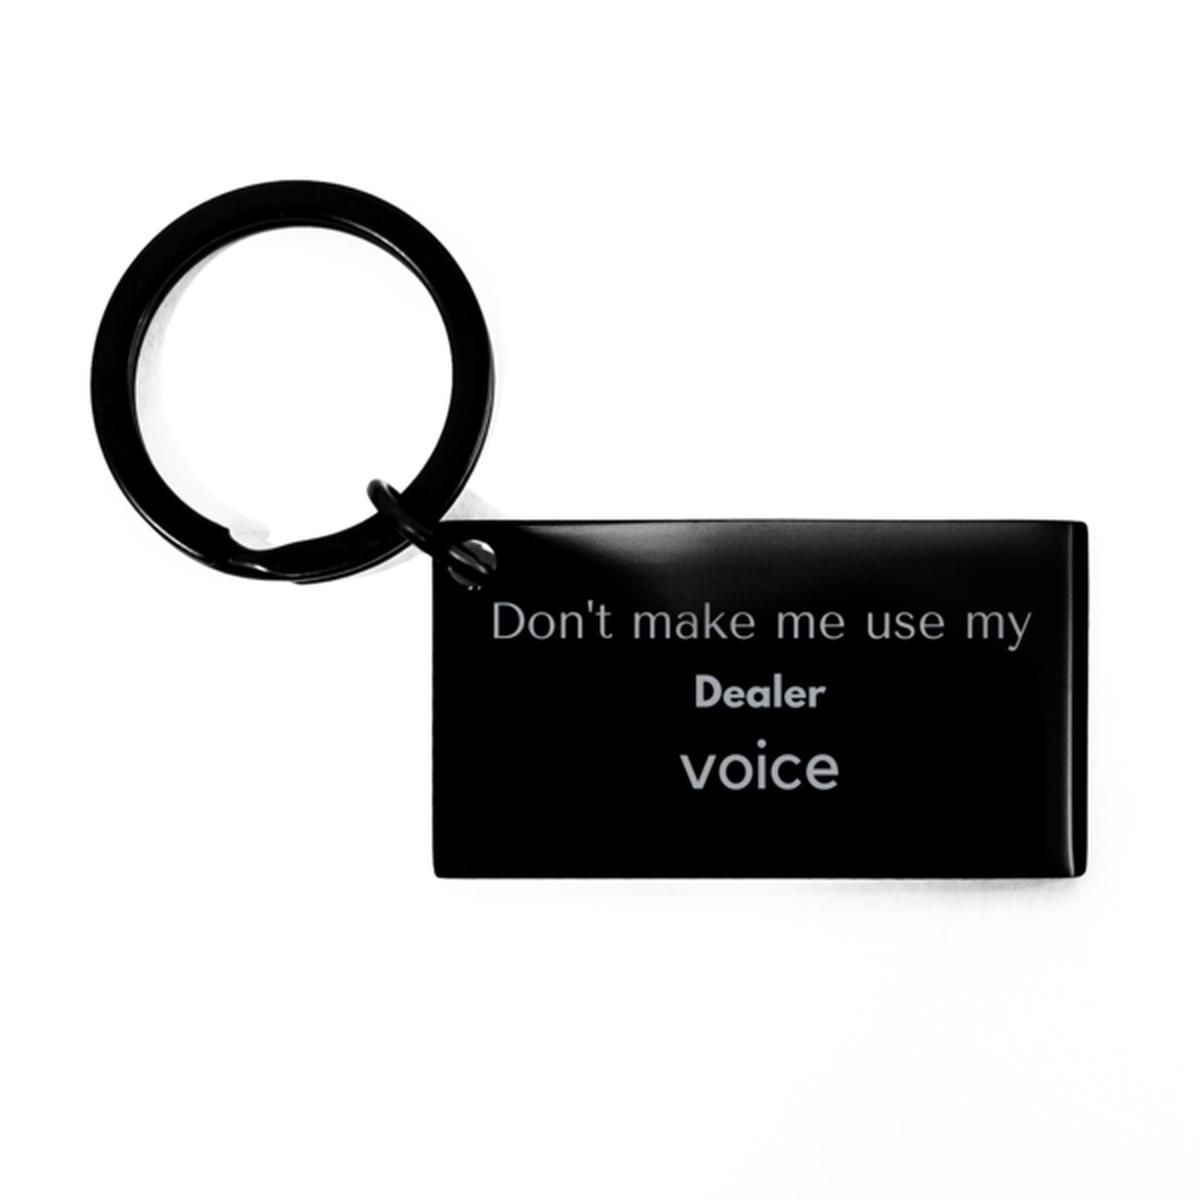 Don't make me use my Dealer voice, Sarcasm Dealer Gifts, Christmas Dealer Keychain Birthday Unique Gifts For Dealer Coworkers, Men, Women, Colleague, Friends